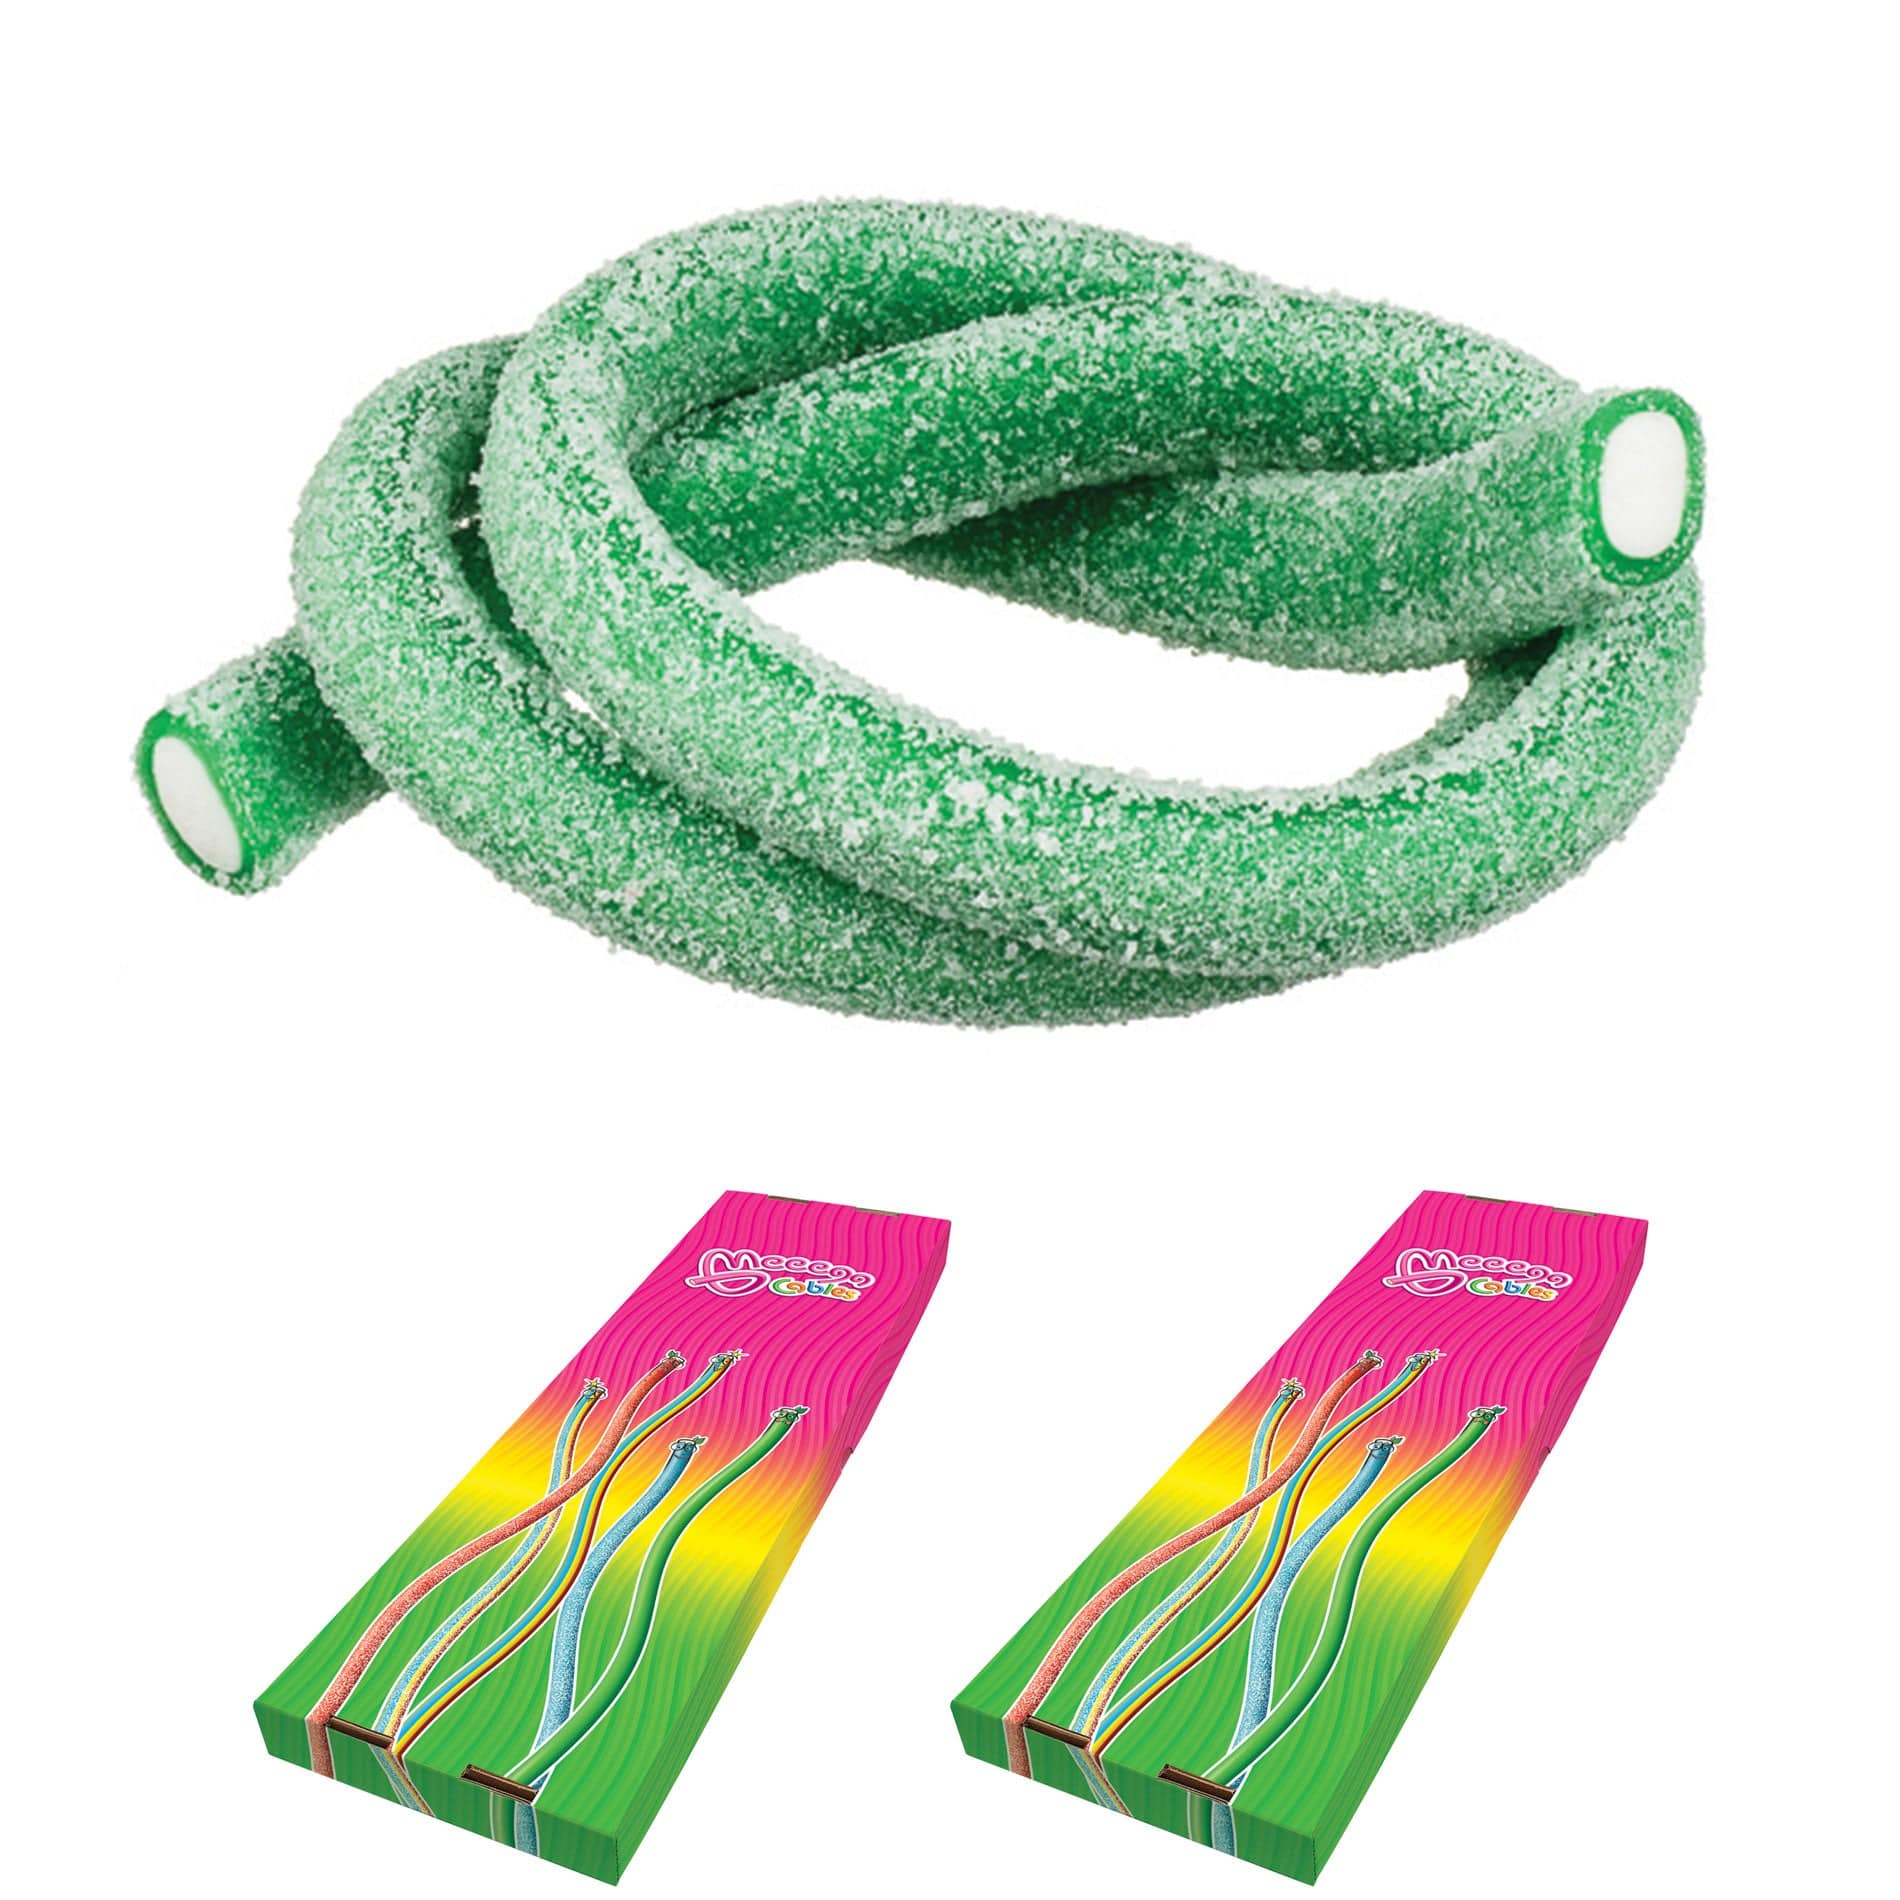 Novelty Concessions Gummy Rope Meeega Cables European Chewy Rope Candy - Box of 30 individually wrapped Meeega Cables, each over 2-feet long cups with lids and straws